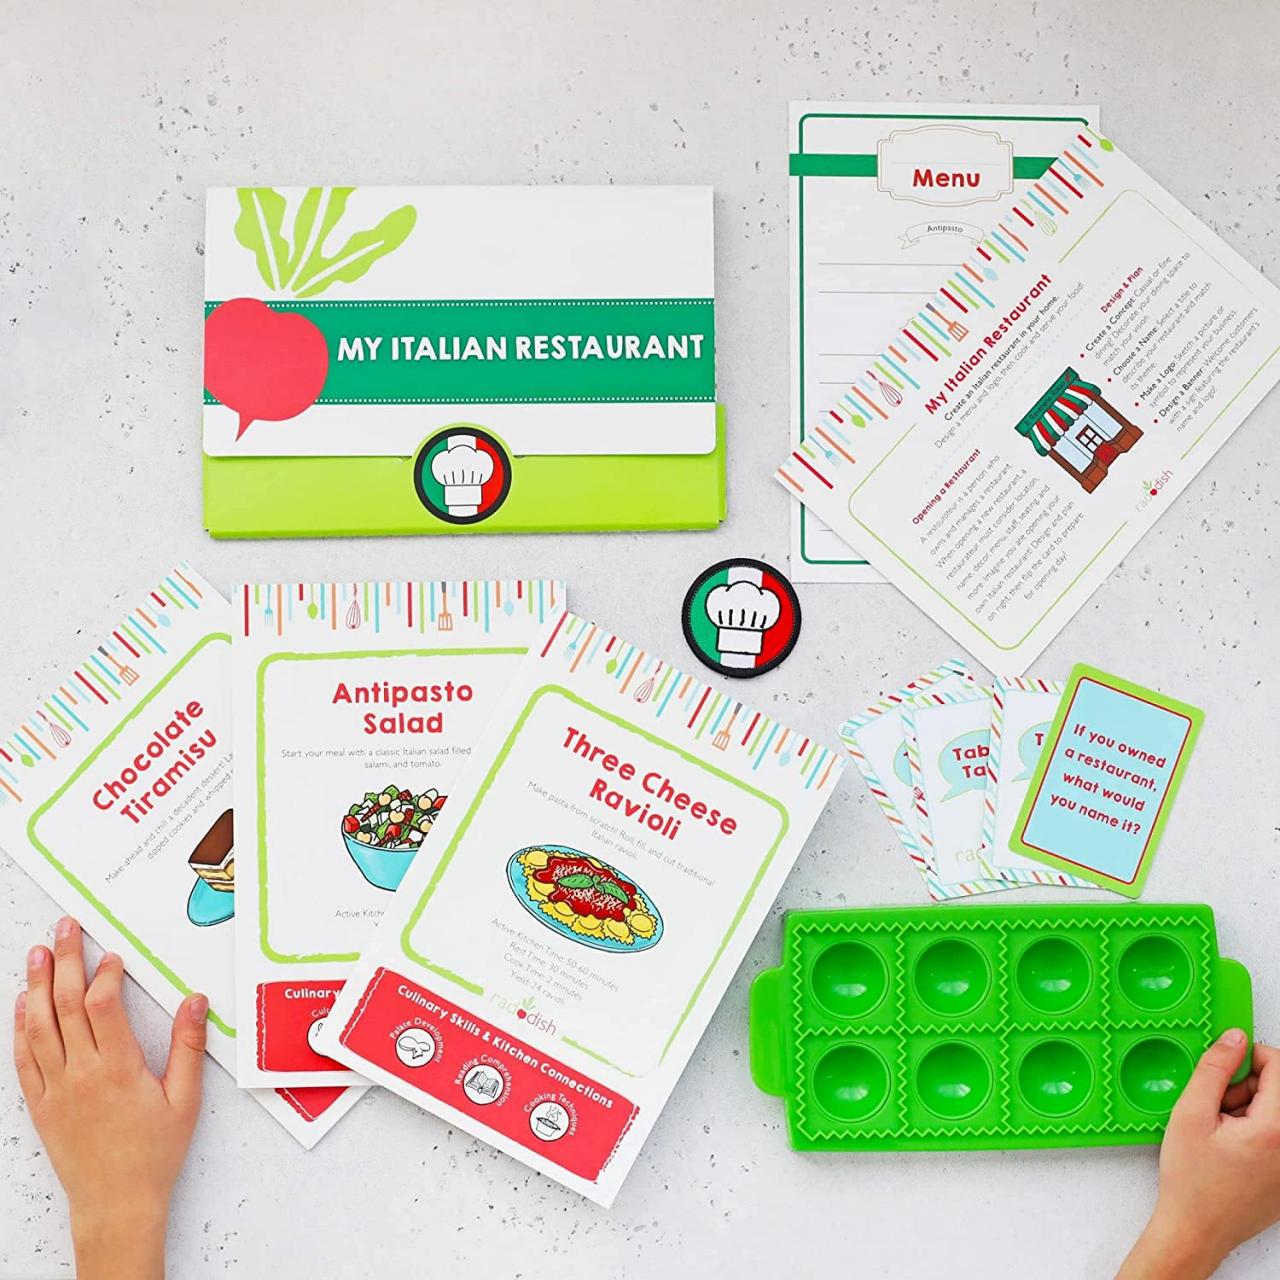 Kids Cooking Kits that have everything needed for a cooking